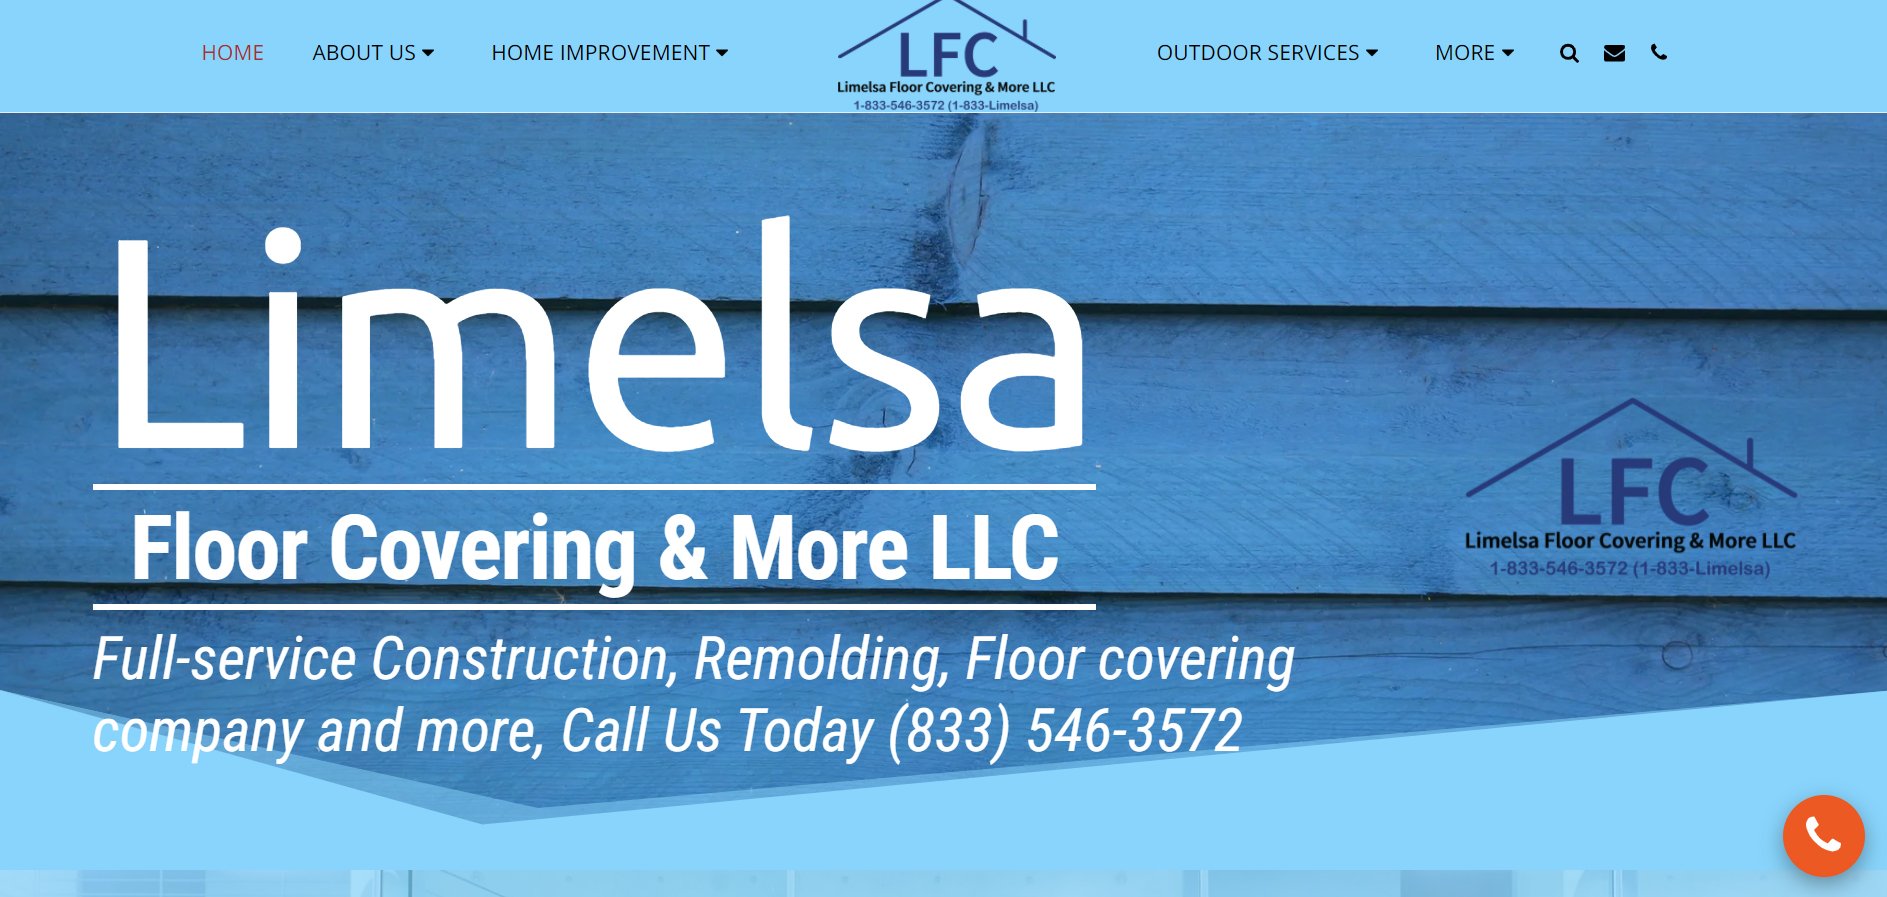 Limelsa - Floor Covering NYC